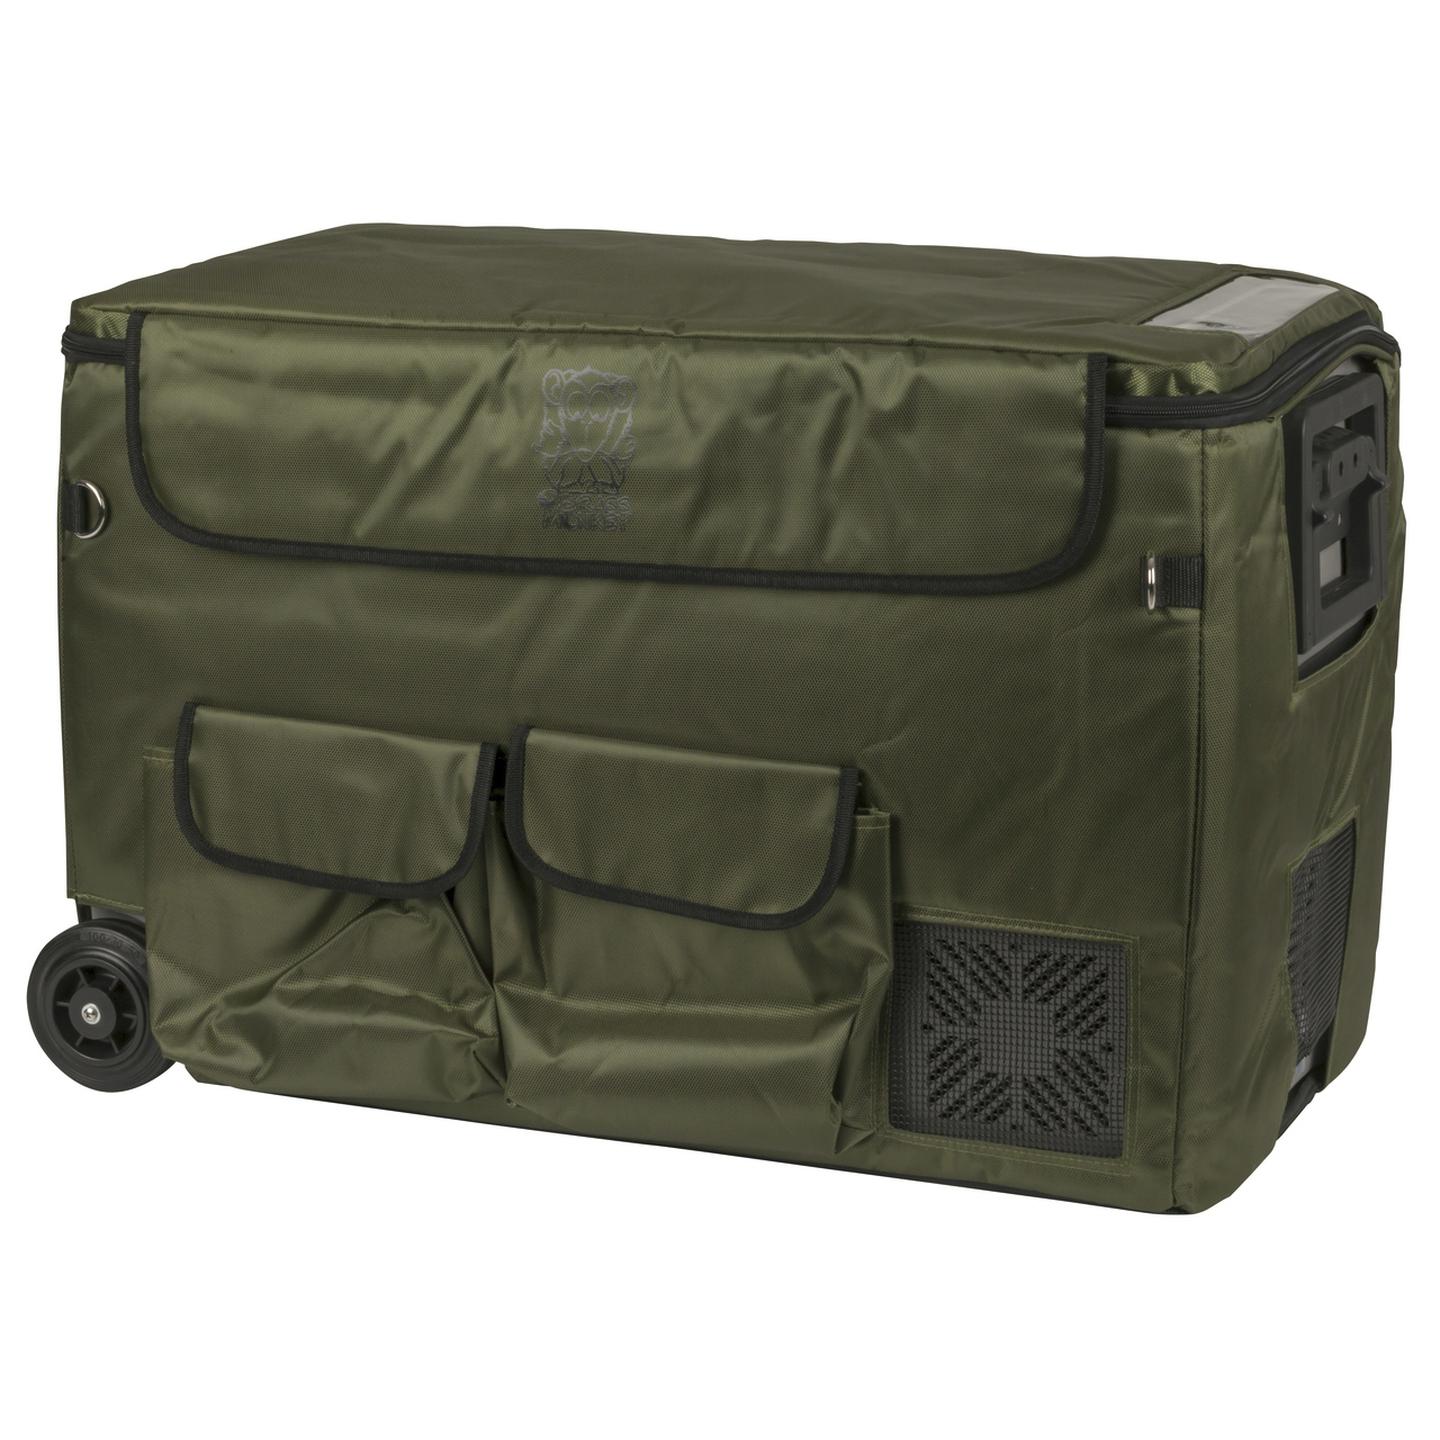 Green Insulated Cover for 60L Brass Monkey Portable Fridge/Freezer